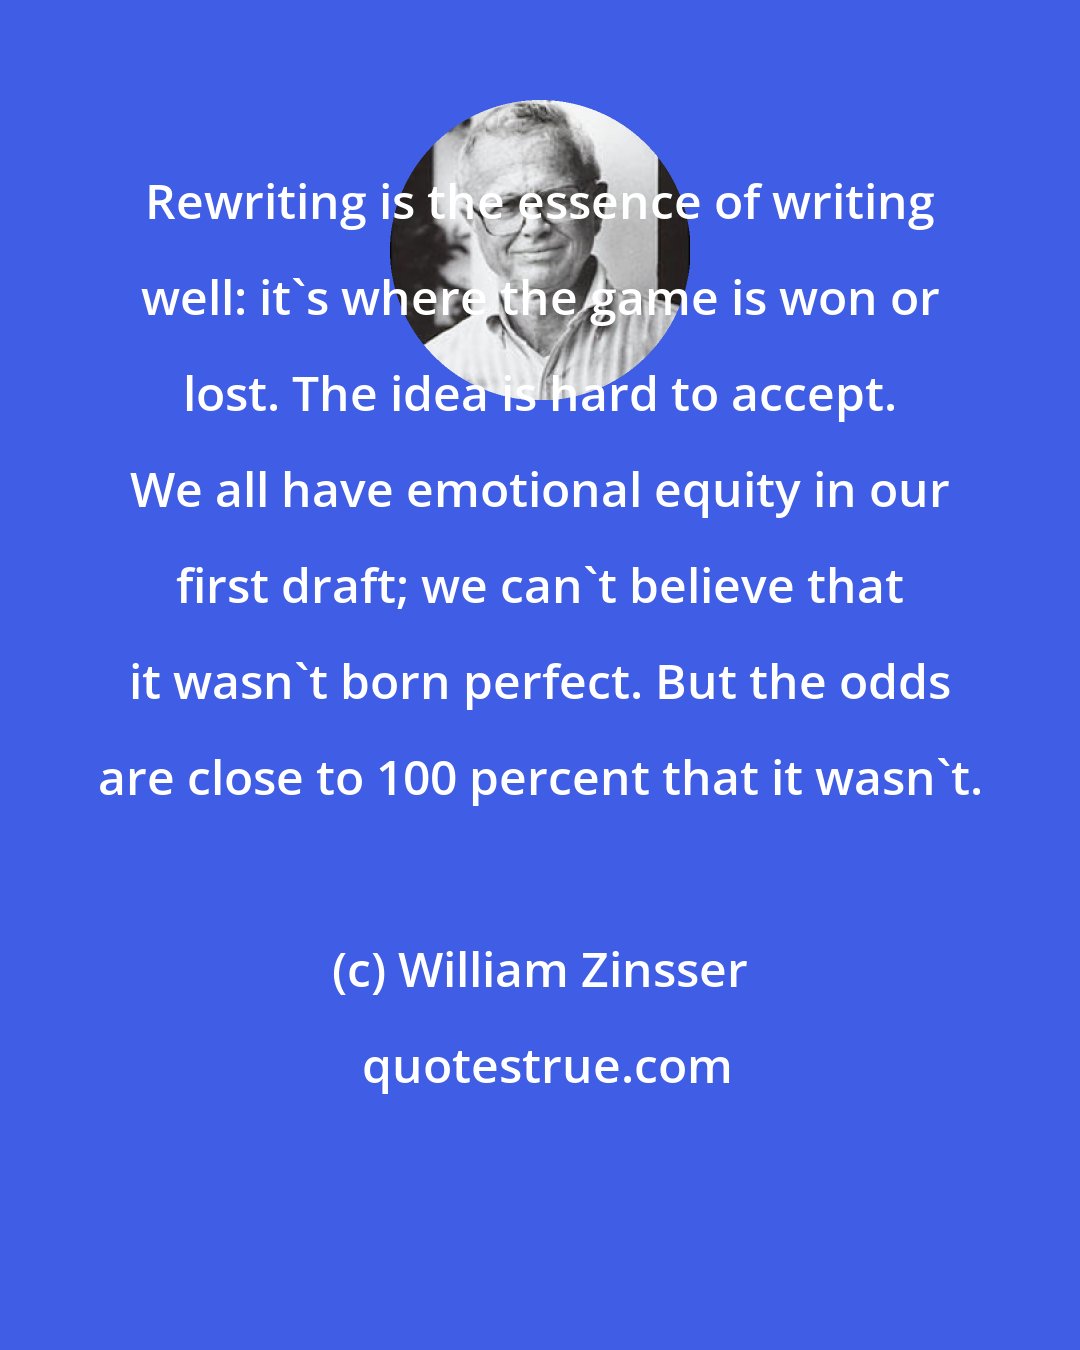 William Zinsser: Rewriting is the essence of writing well: it's where the game is won or lost. The idea is hard to accept. We all have emotional equity in our first draft; we can't believe that it wasn't born perfect. But the odds are close to 100 percent that it wasn't.